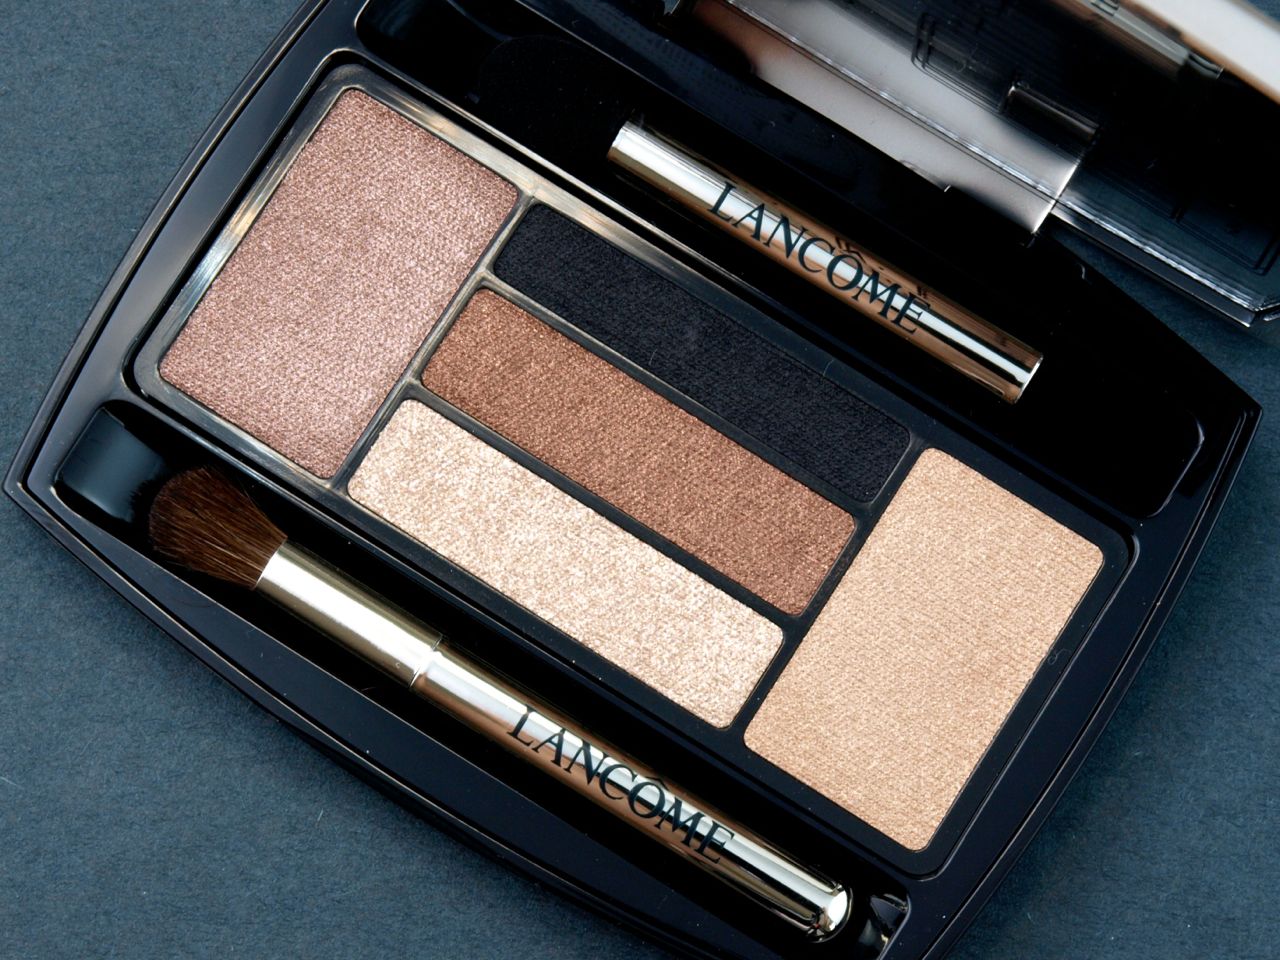 Lancome Holiday 2014 Parisian Lights Collection: Review and Swatches